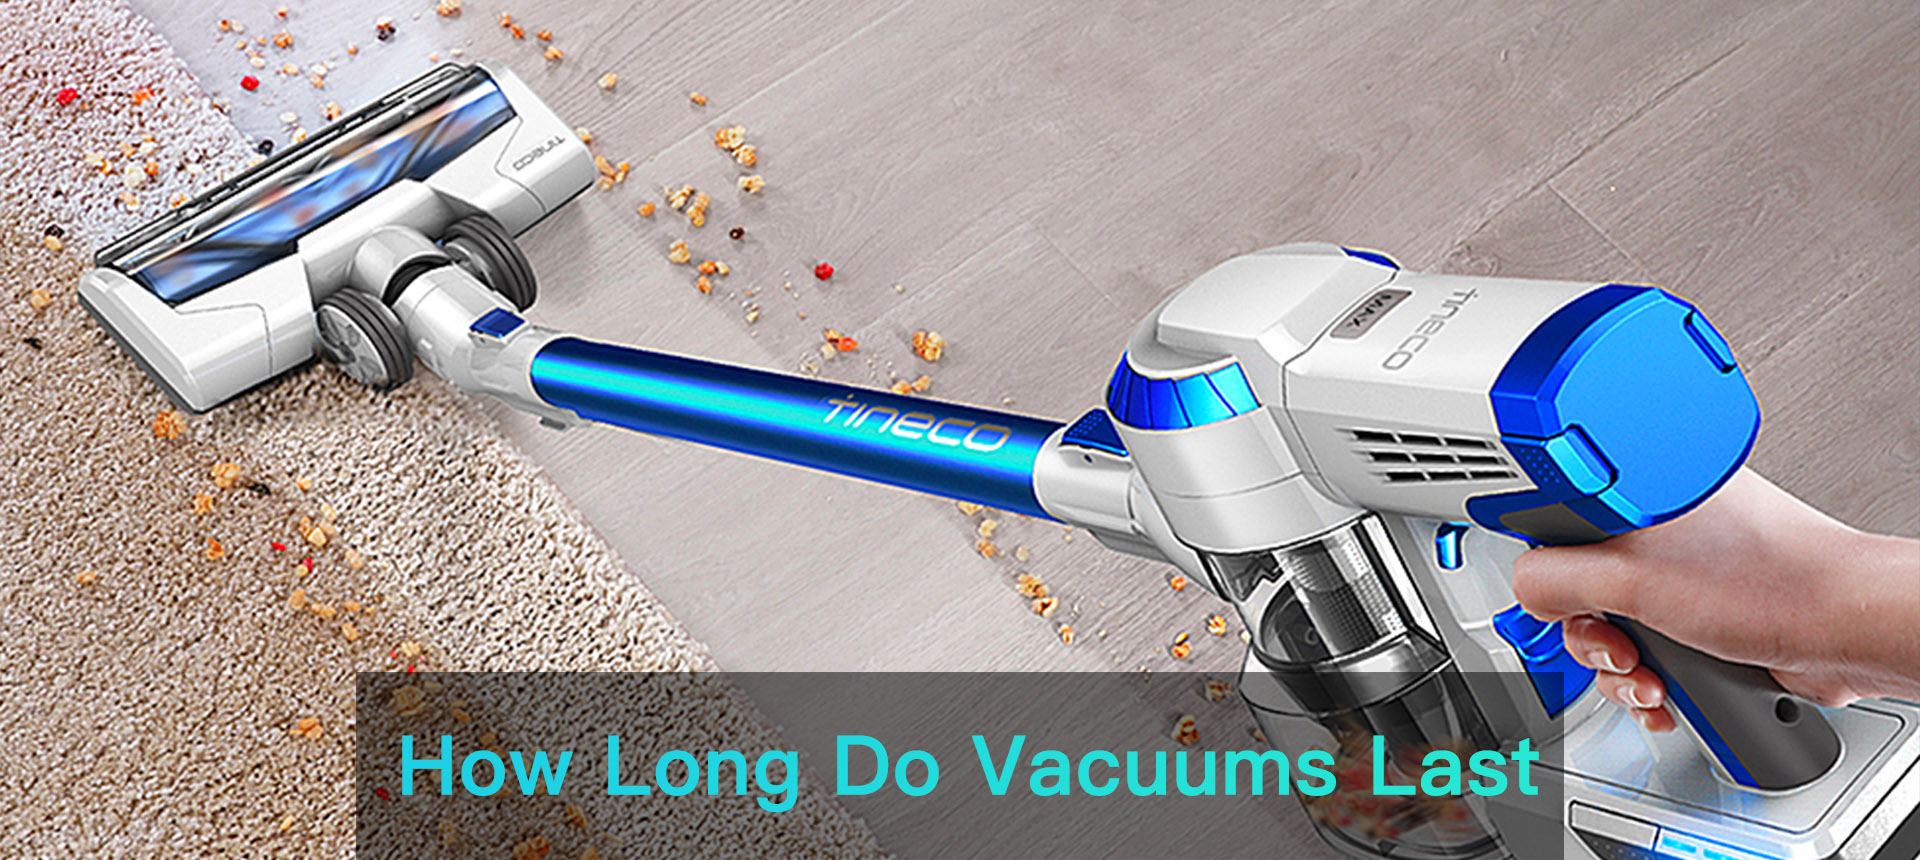 How long do Vacuum Cleaners Last